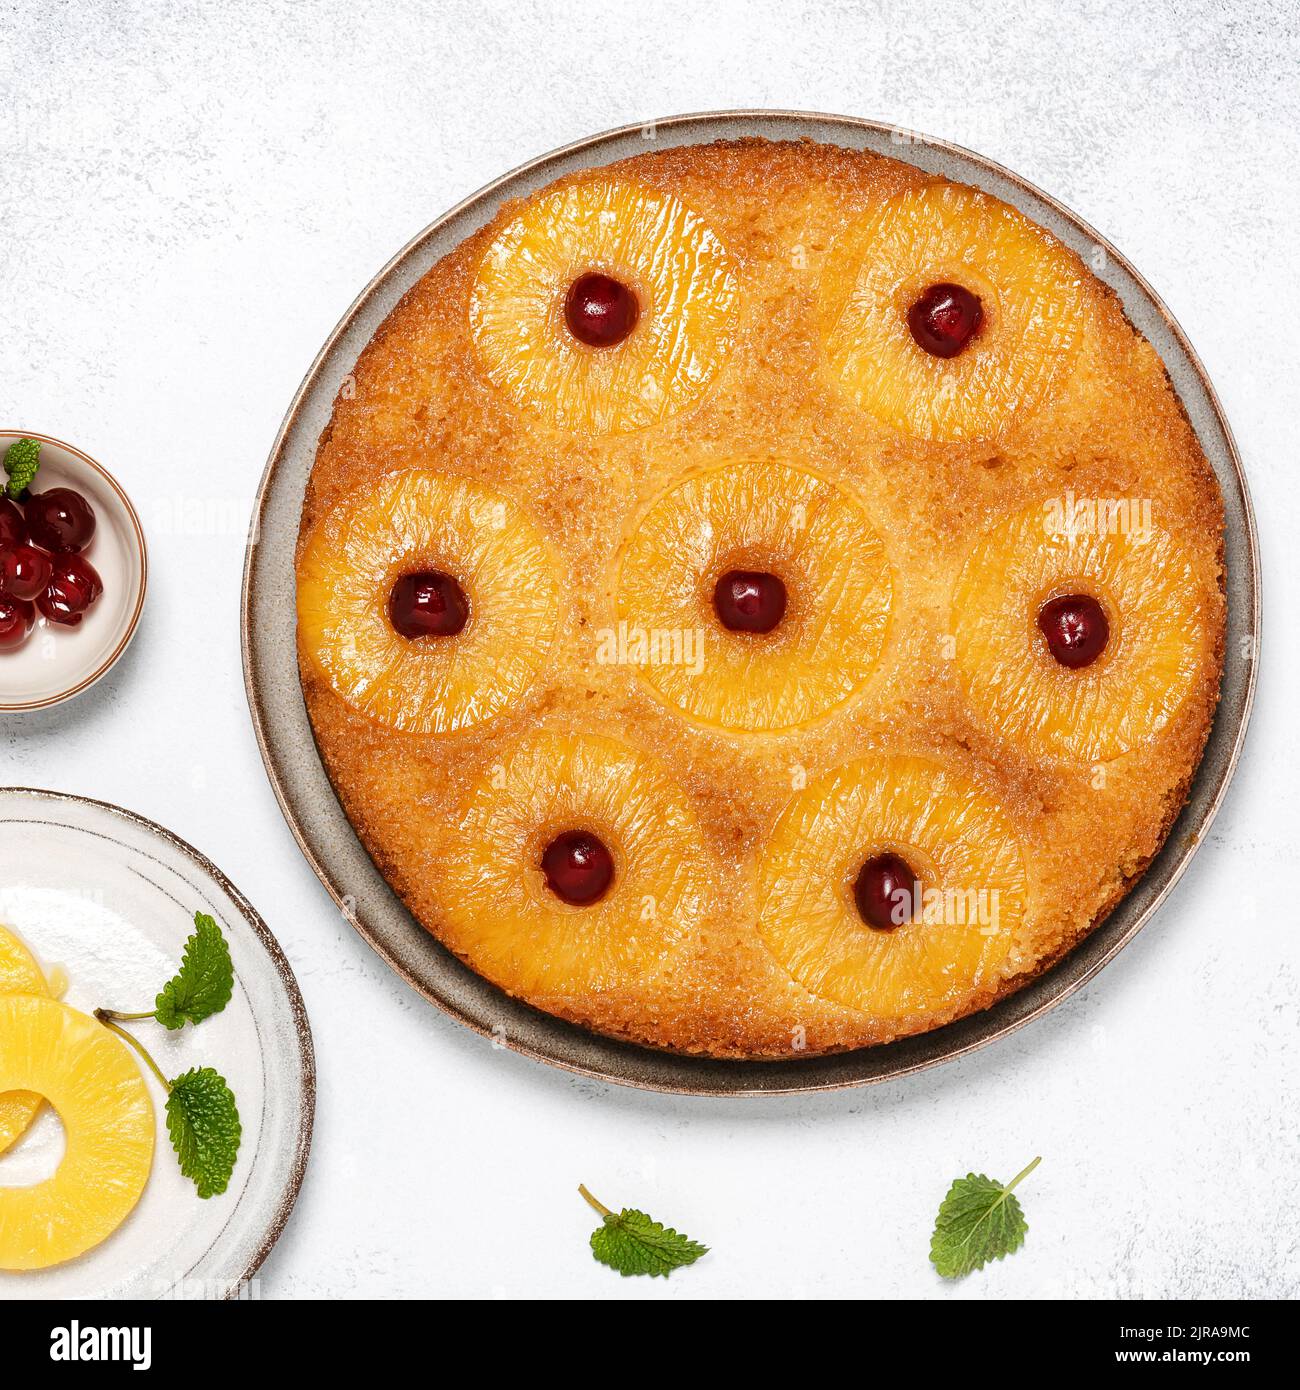 Homemade pineapple upside down cake with glace cherries. Delicious vegetarian sweet food concept. Square image. Stock Photo